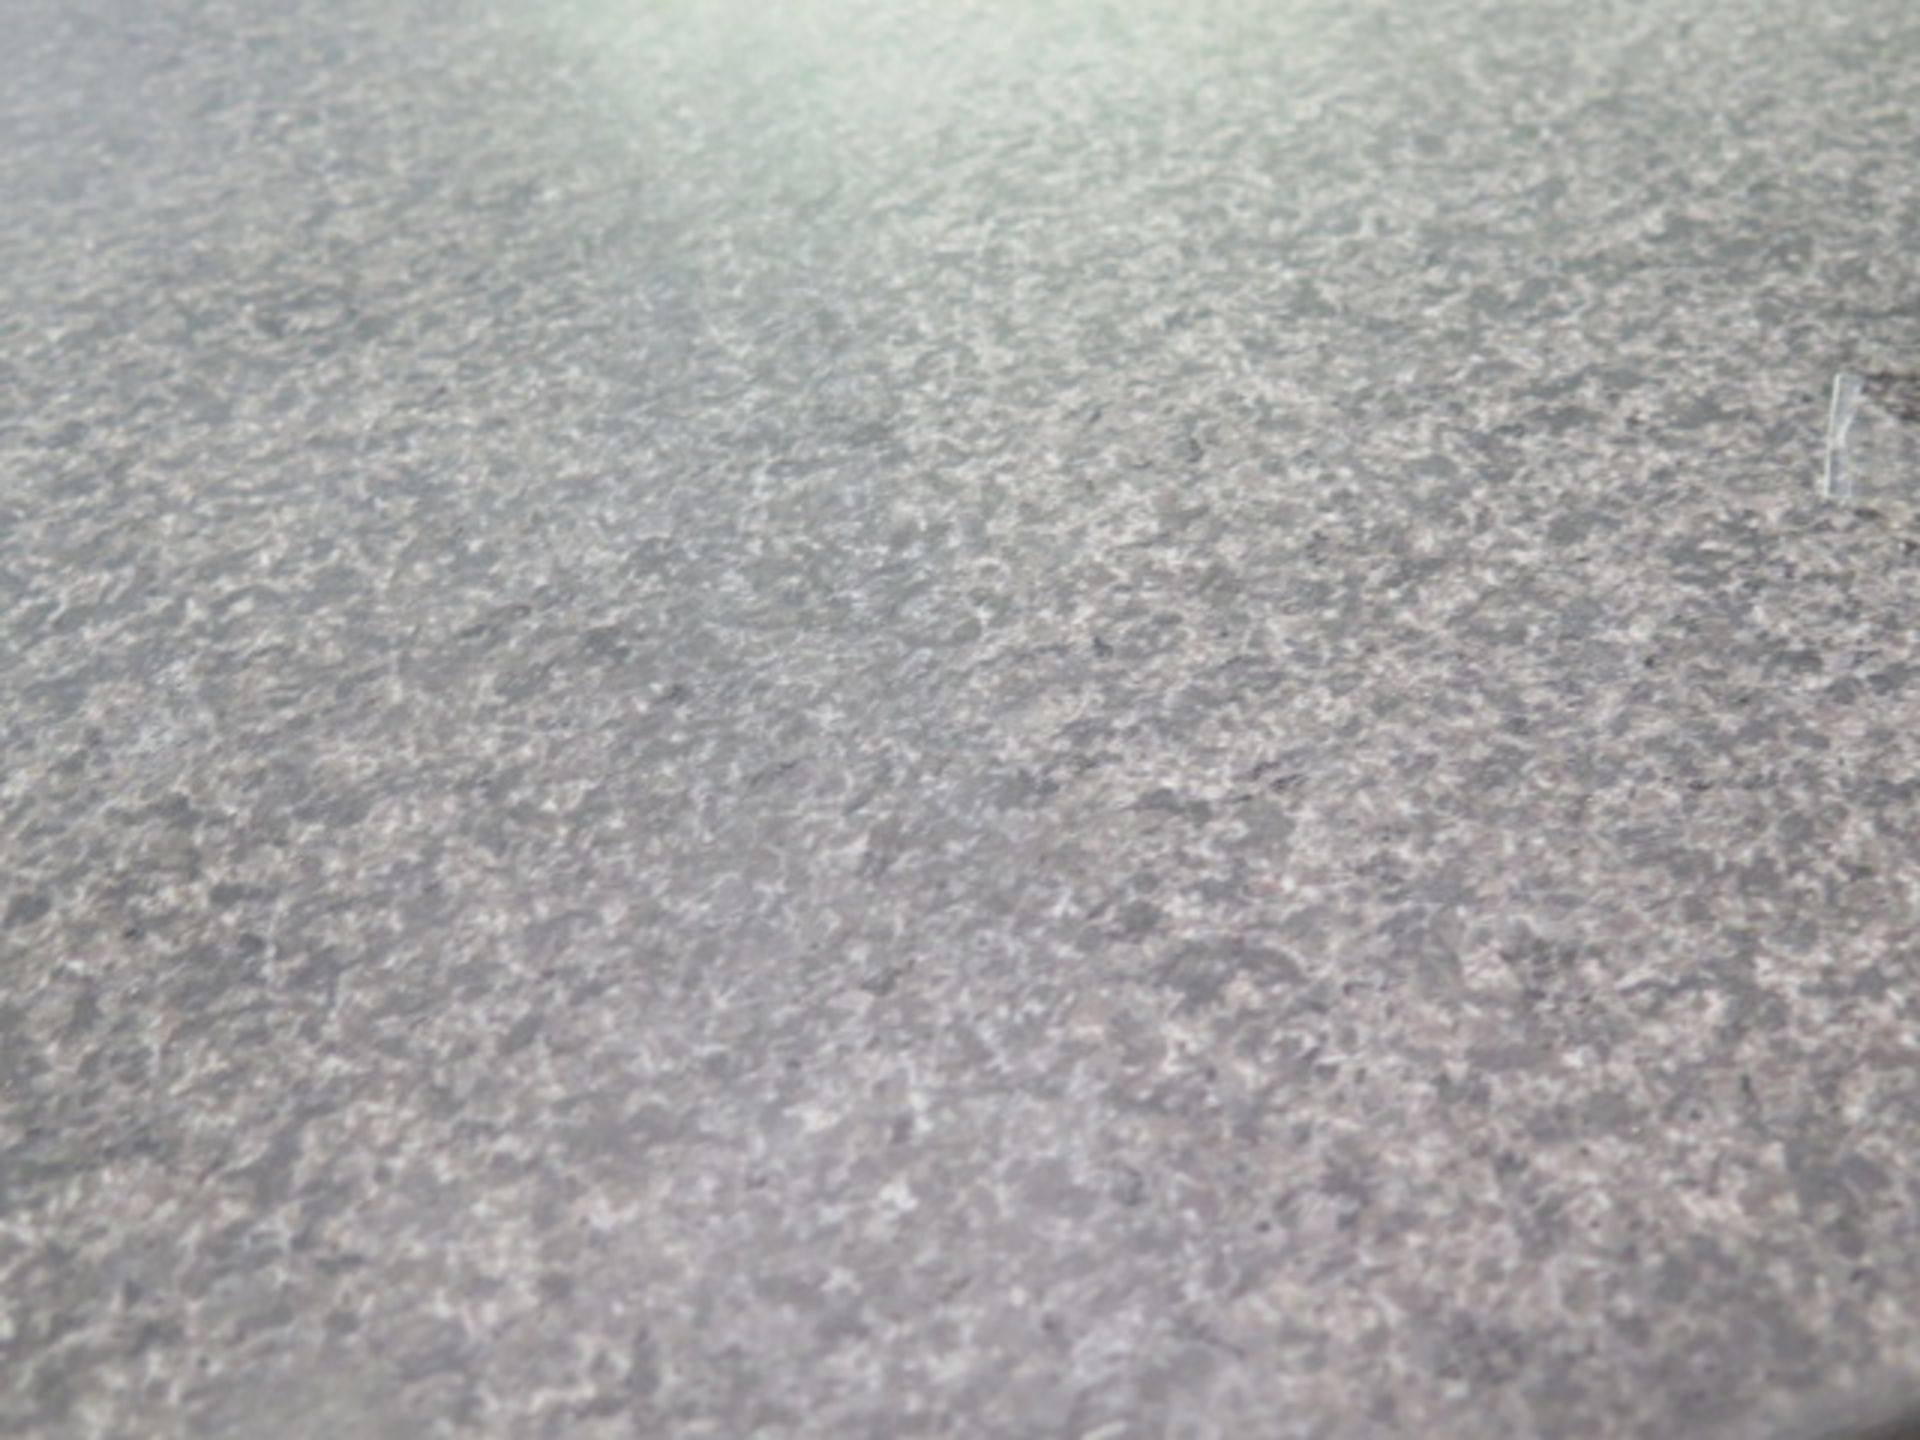 18” x 24” x 3 ½” Granite Surface Plate (SOLD AS-IS - NO WARRANTY) - Image 4 of 4